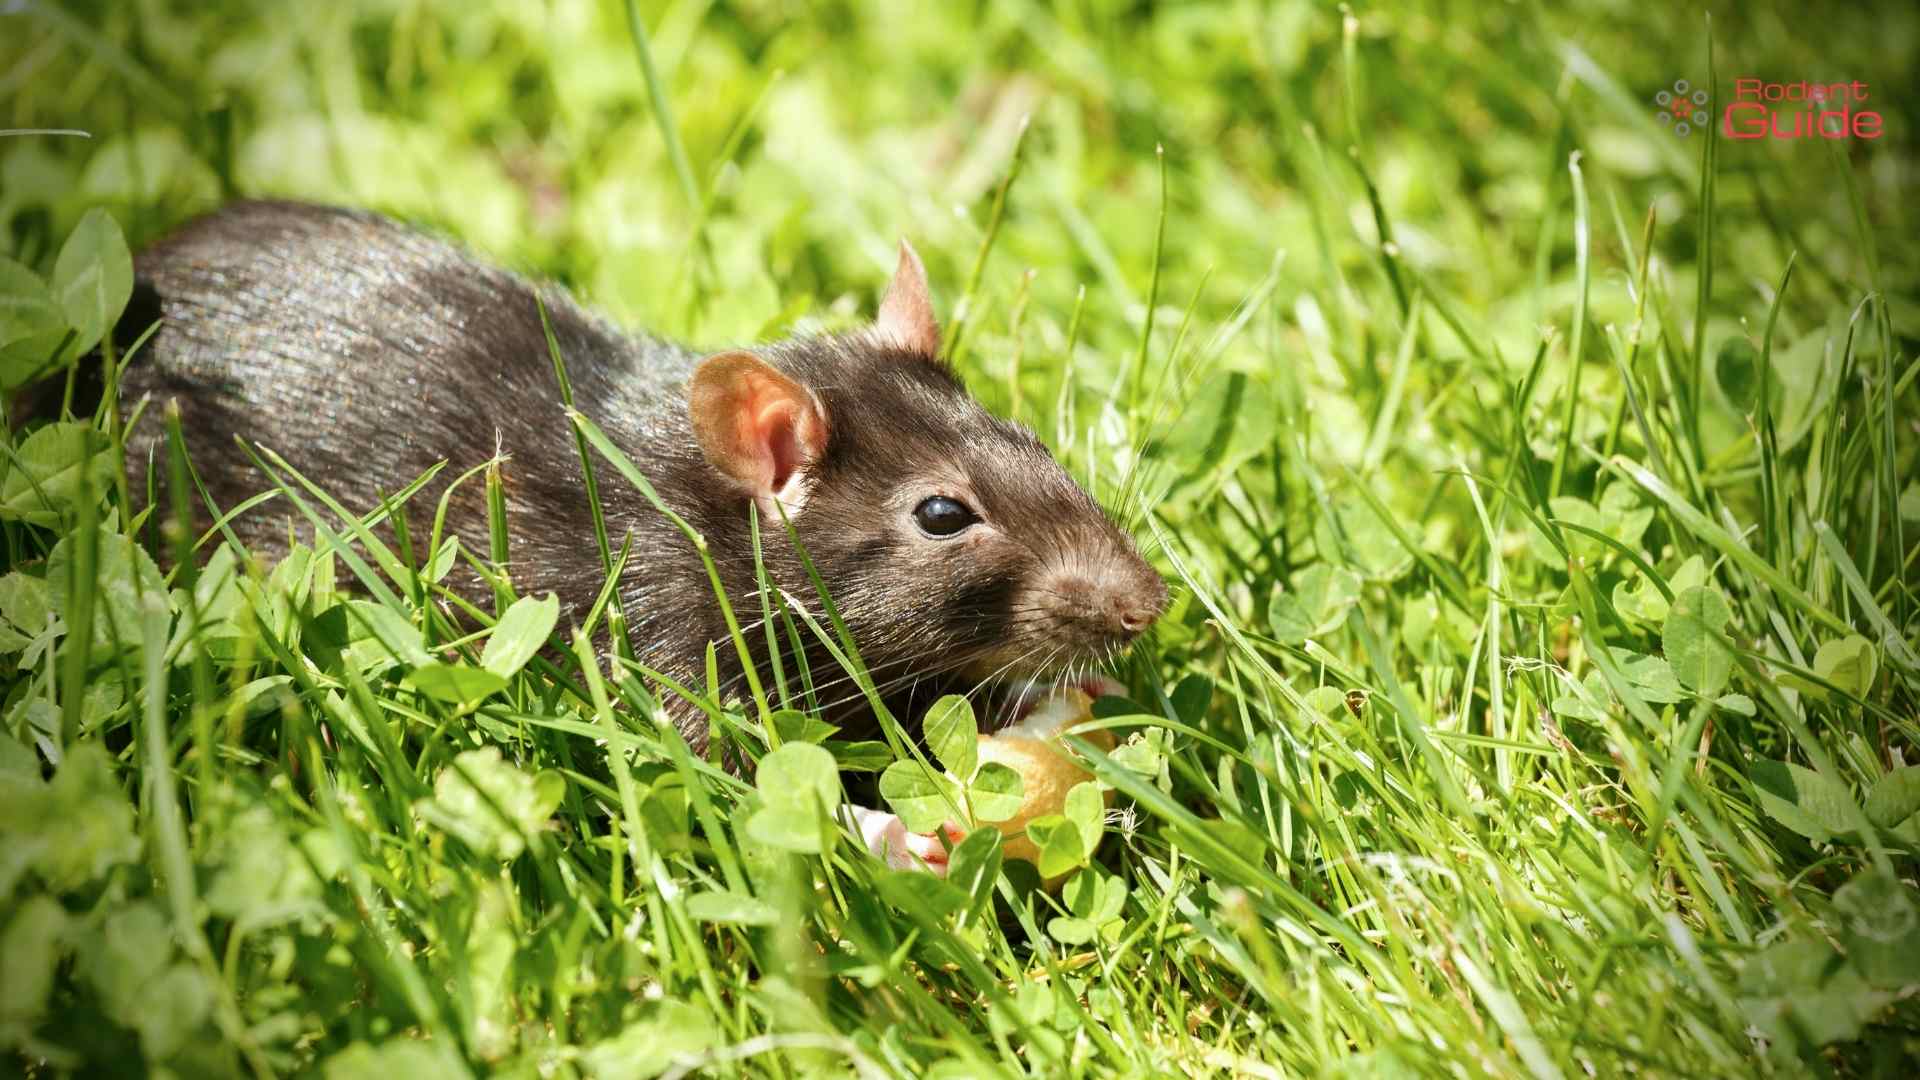 Do Rats Eat Human Poop? The Grim Reality